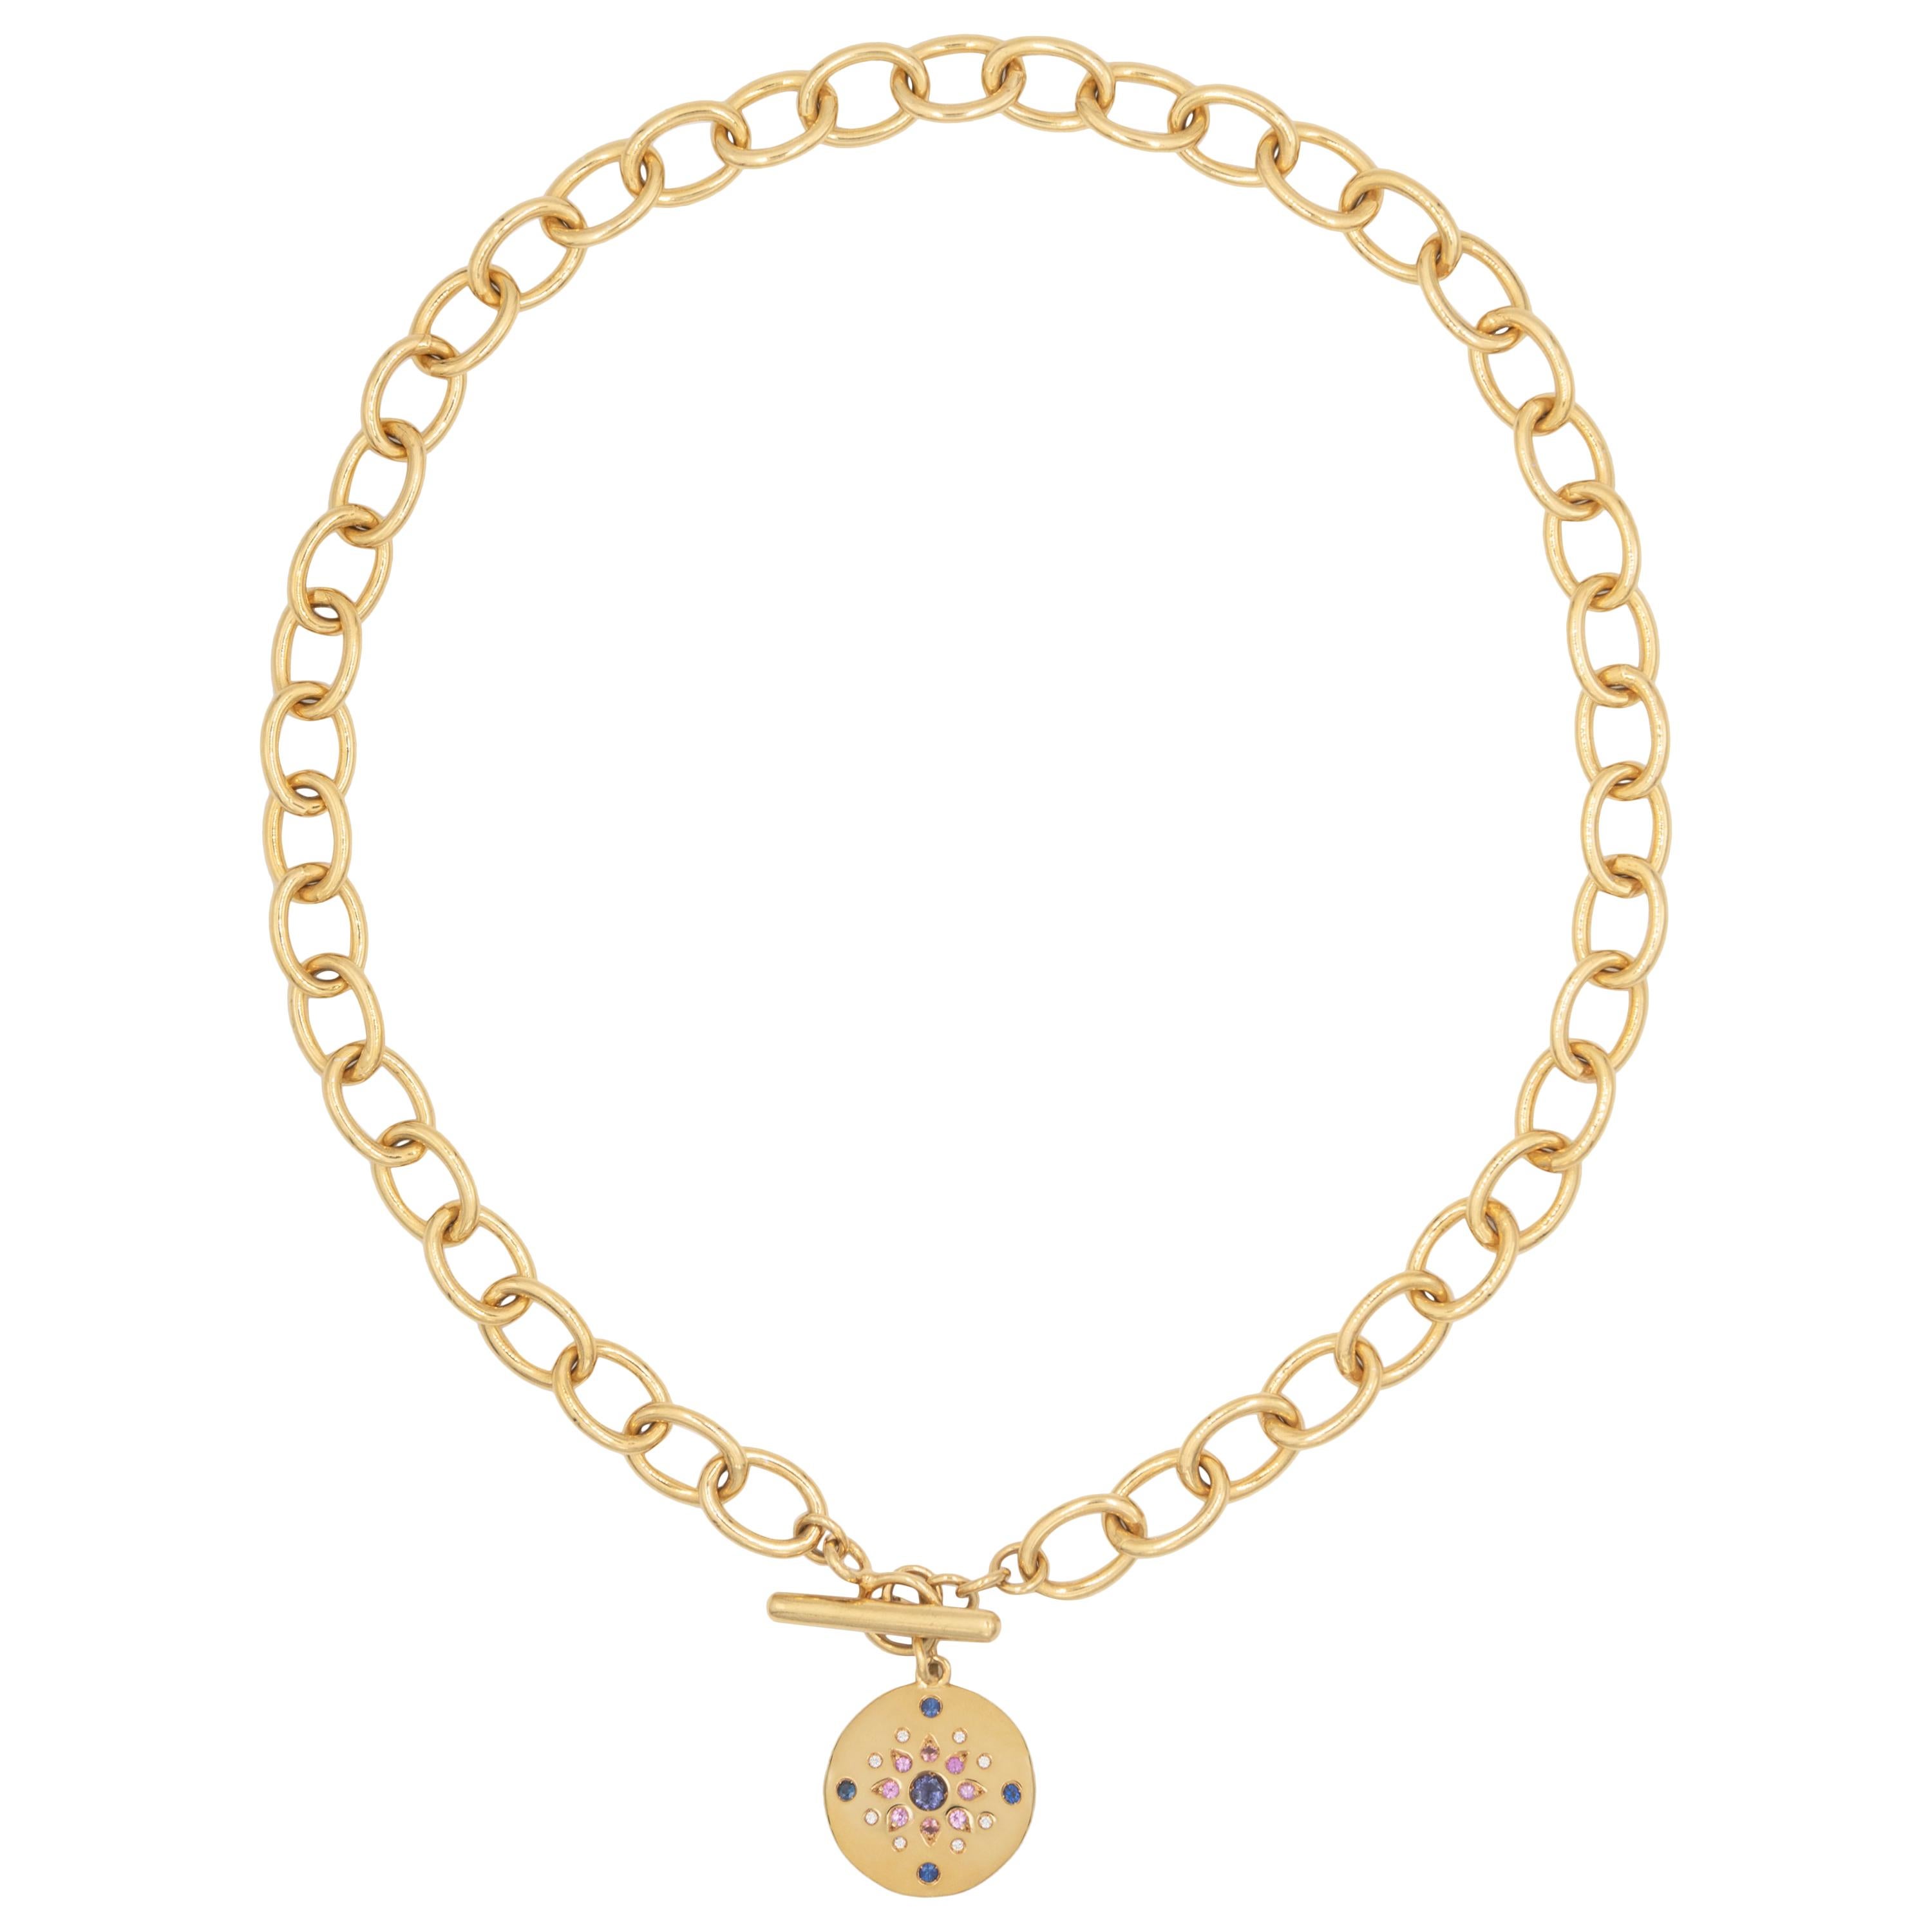 18 karat yellow gold necklace with round disc pendant and choker length large chain. The pendant is set with 21 gemstones including a central aquamarine (0,16-carat) and diamonds (0,33-carat). 
  
The length of the chain for this necklace is 41 cm